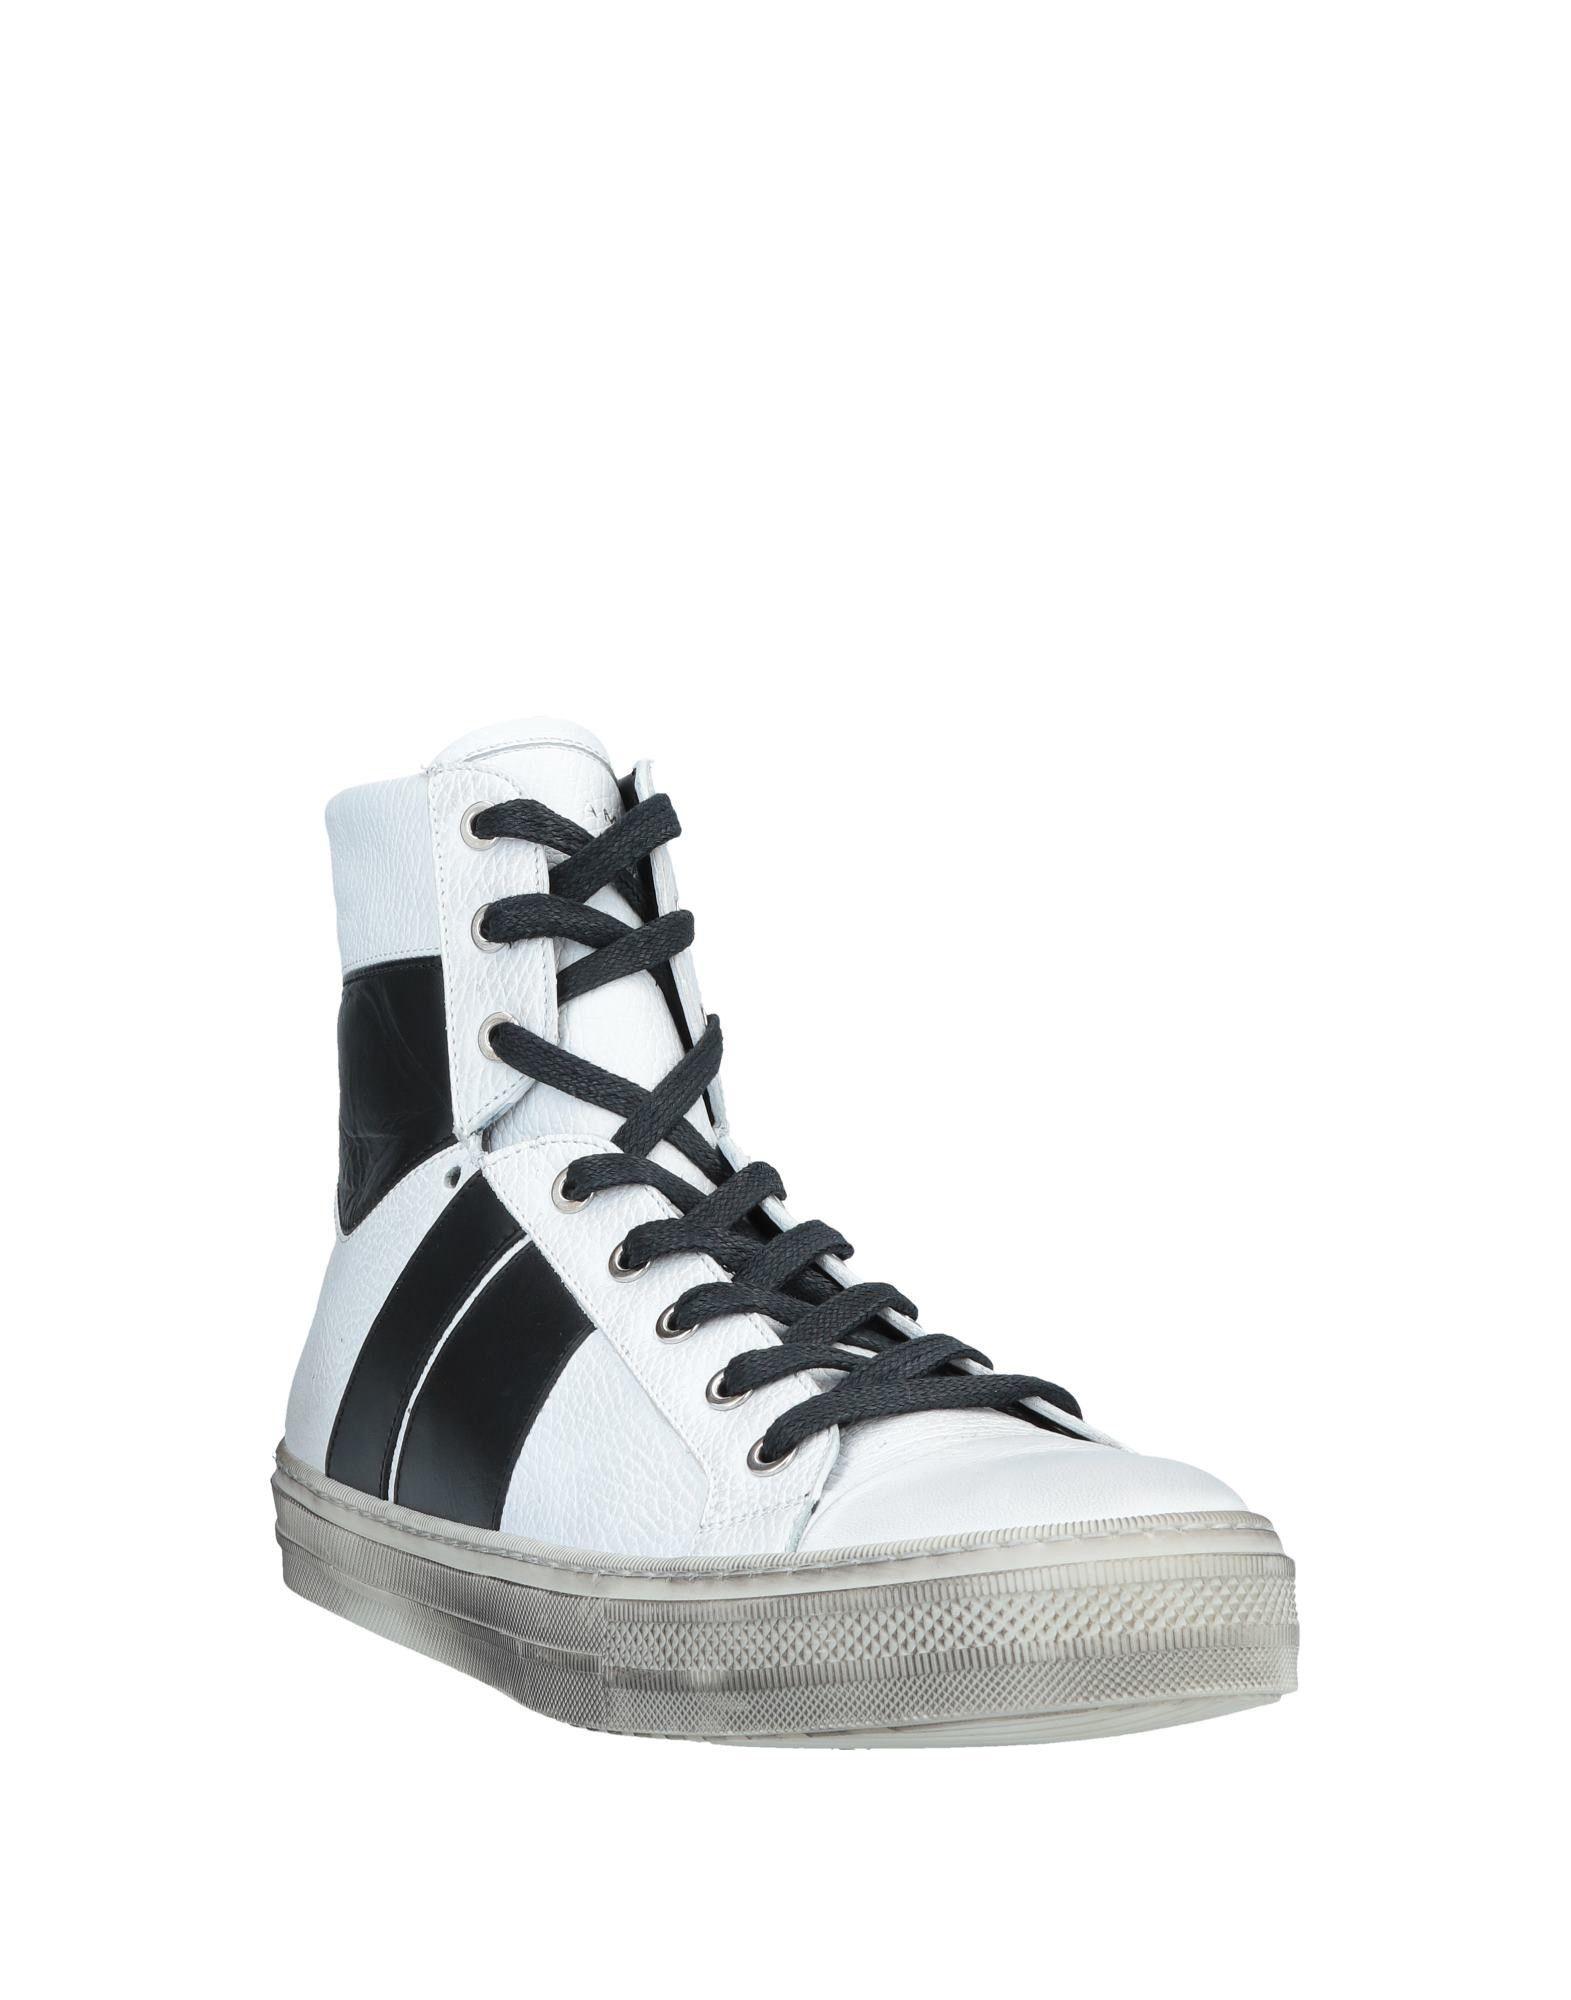 Amiri High-tops & Sneakers in White for Men - Lyst